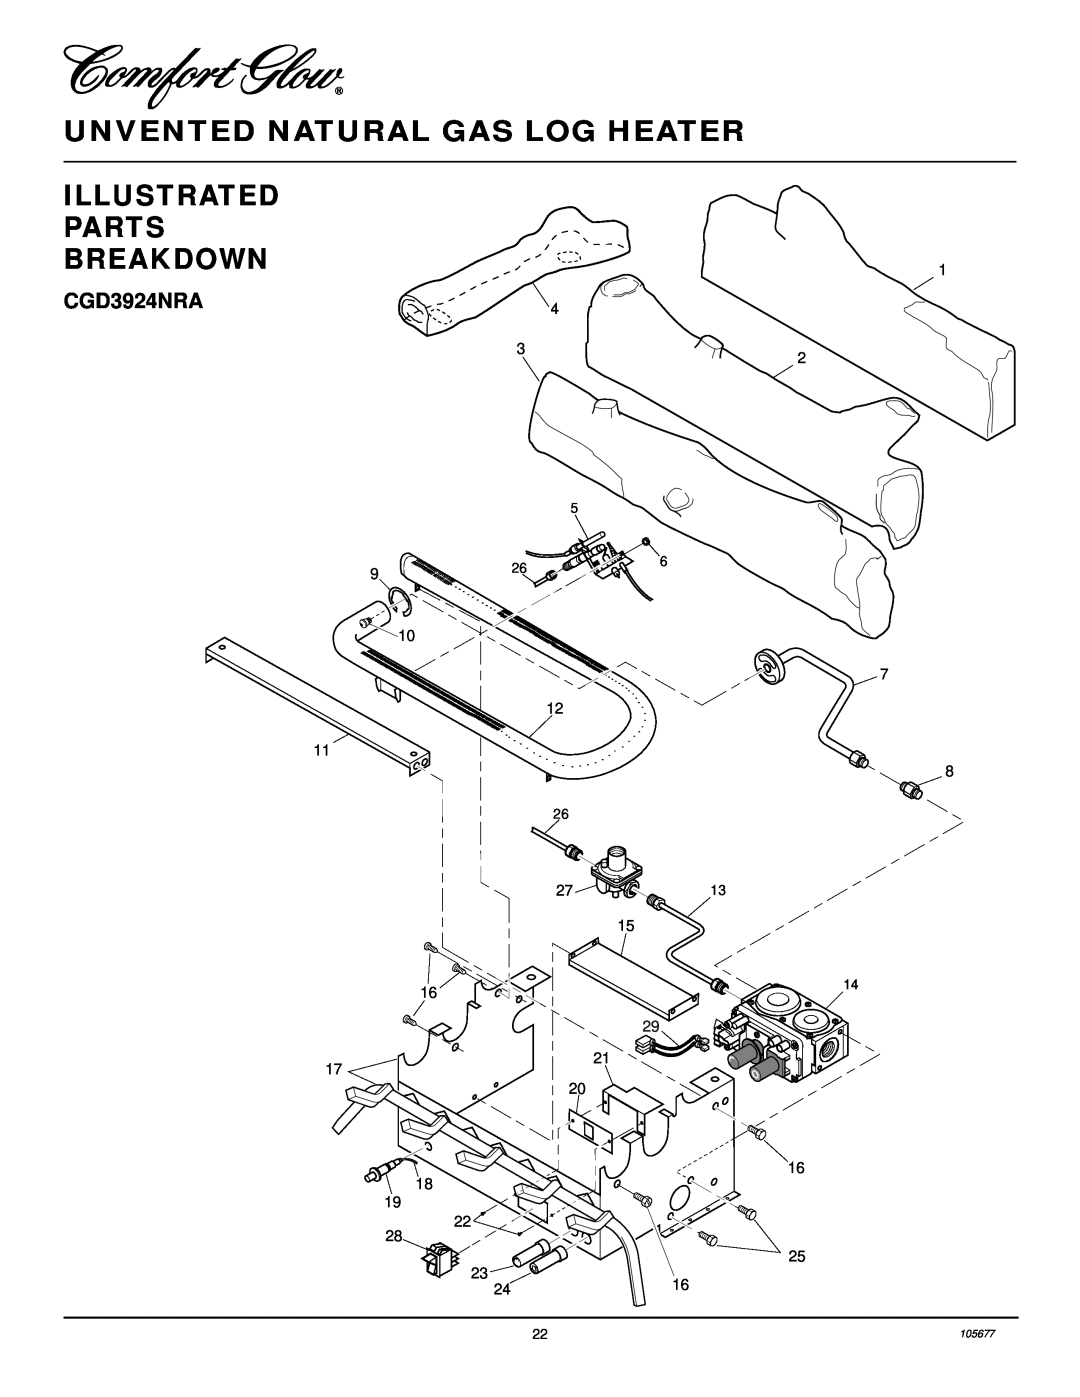 Desa CGB3924NRA, CGB3930NRA installation manual Illustrated Parts Breakdown, CGD3924NRA, Unvented Natural Gas Log Heater 